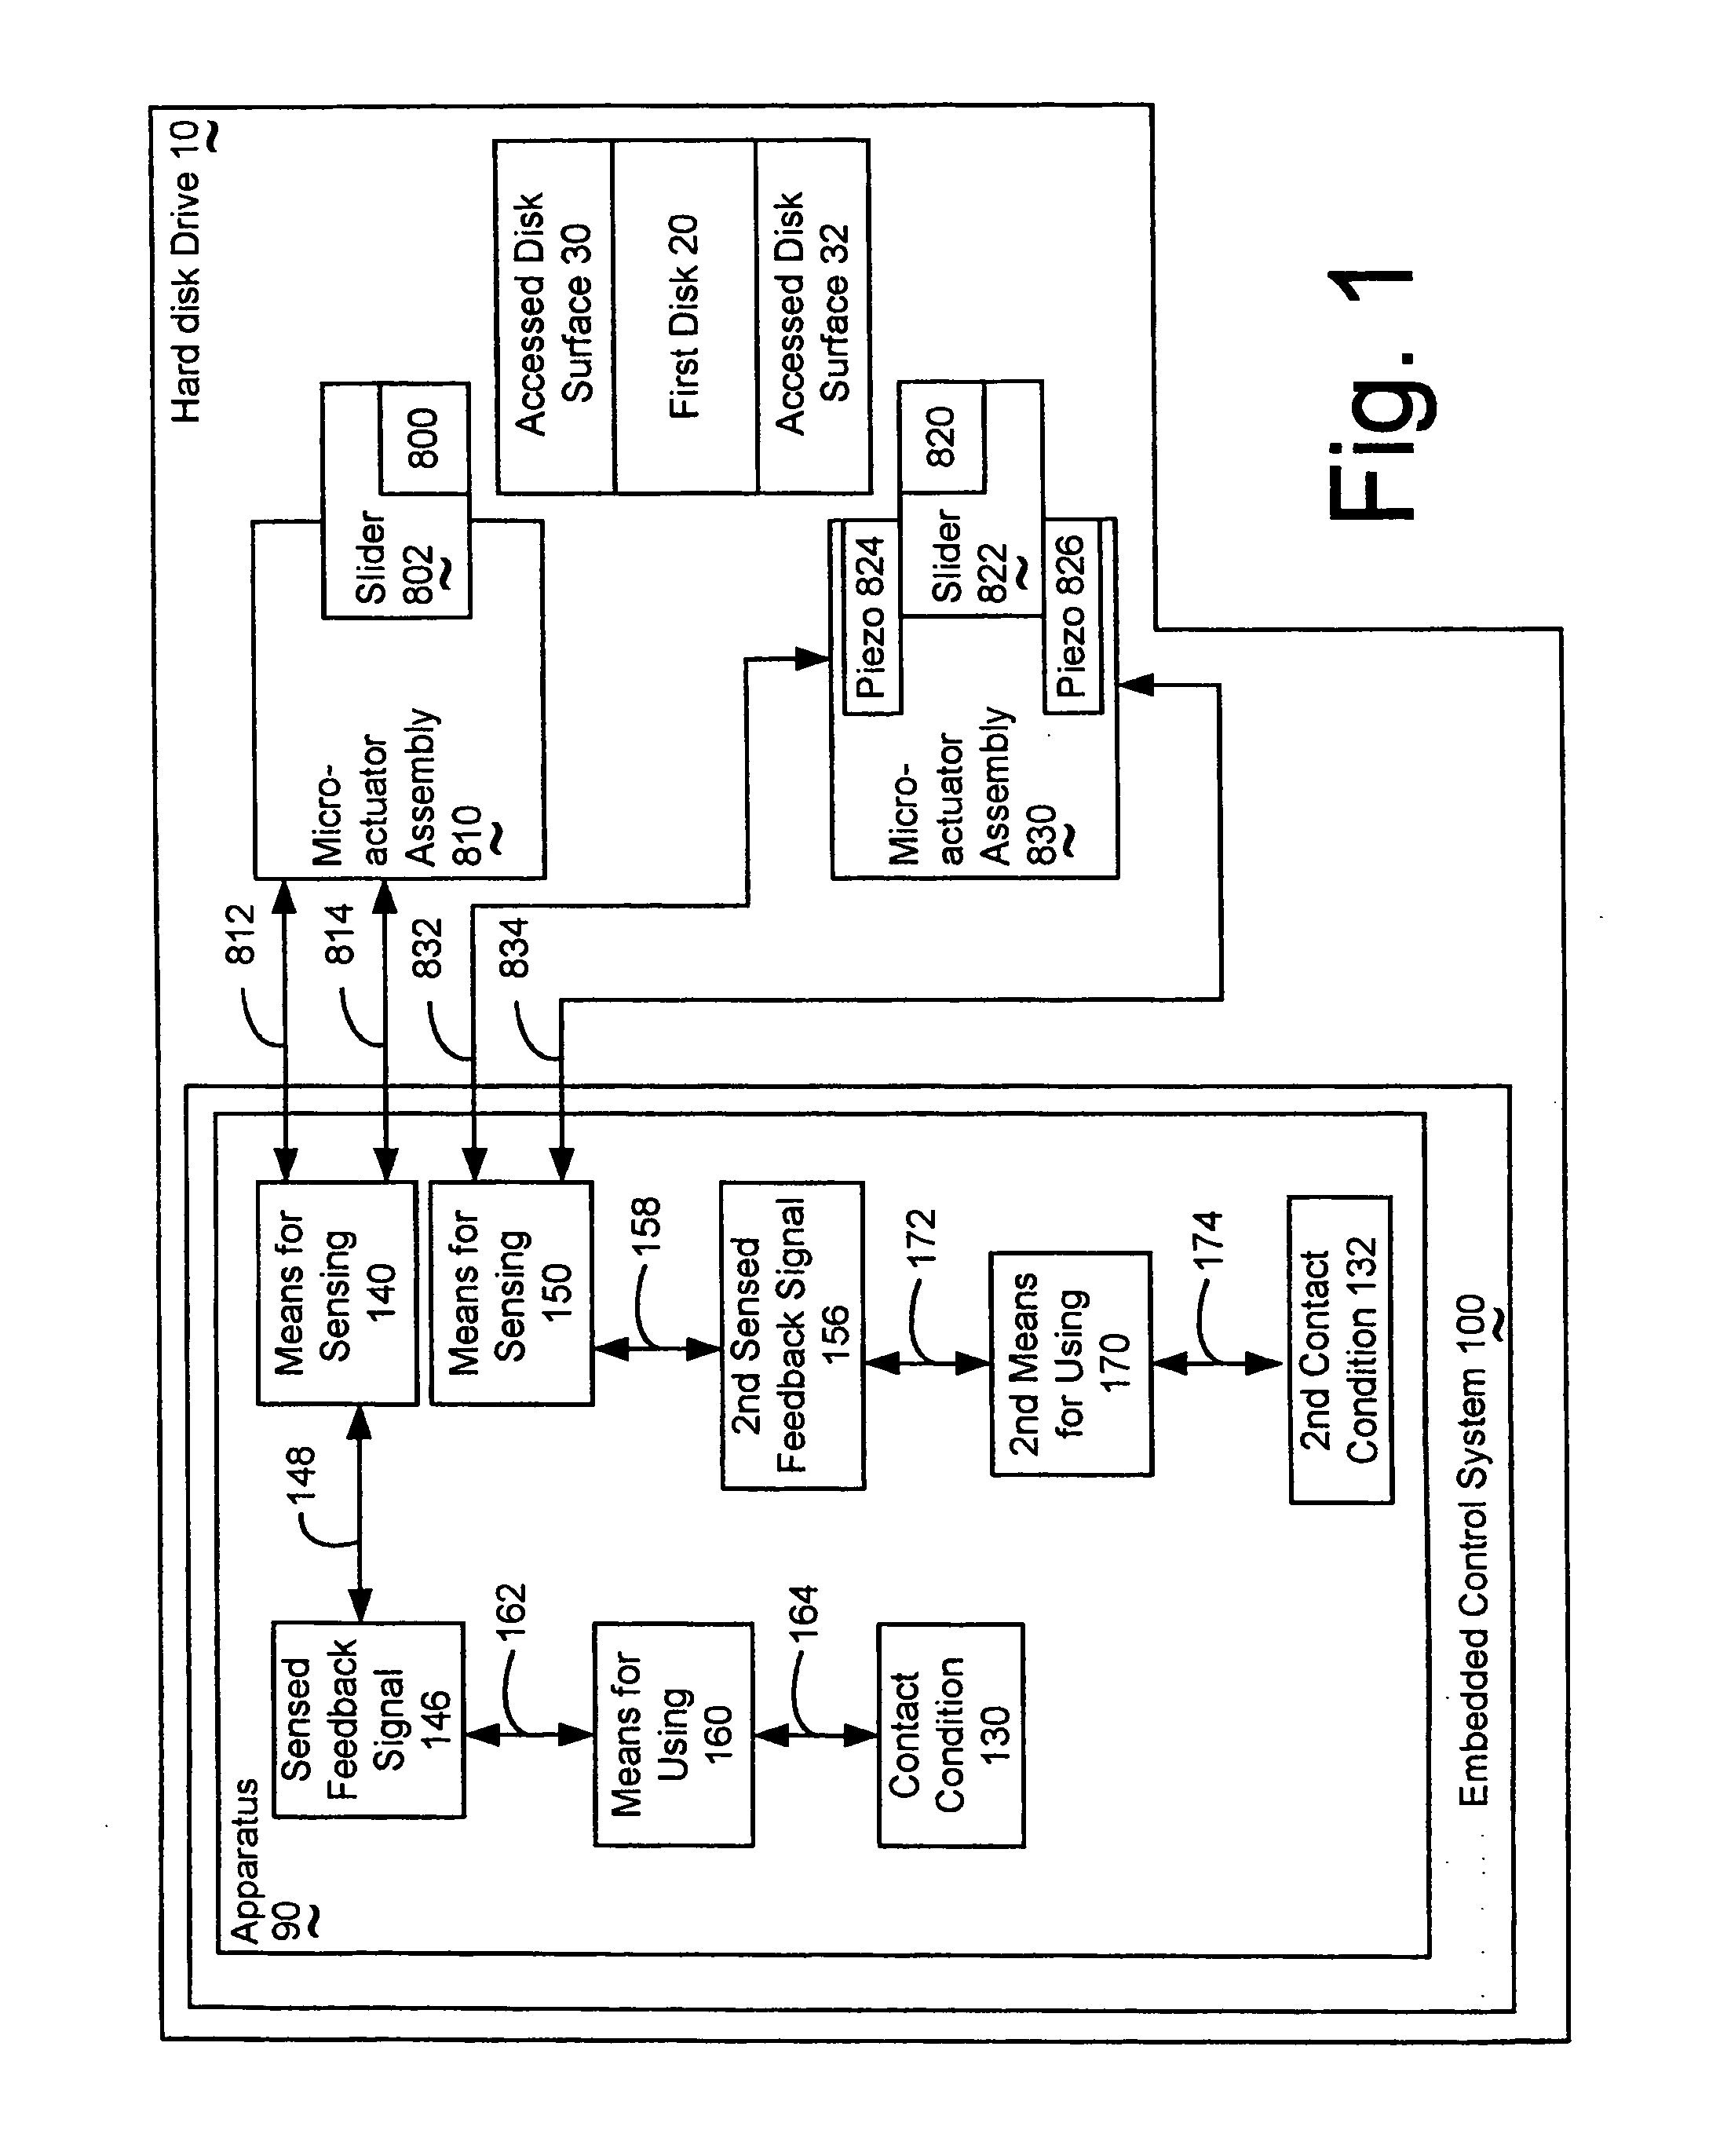 Apparatus for detecting contact between a read-write head and the accessed disk surface in a hard disk drive